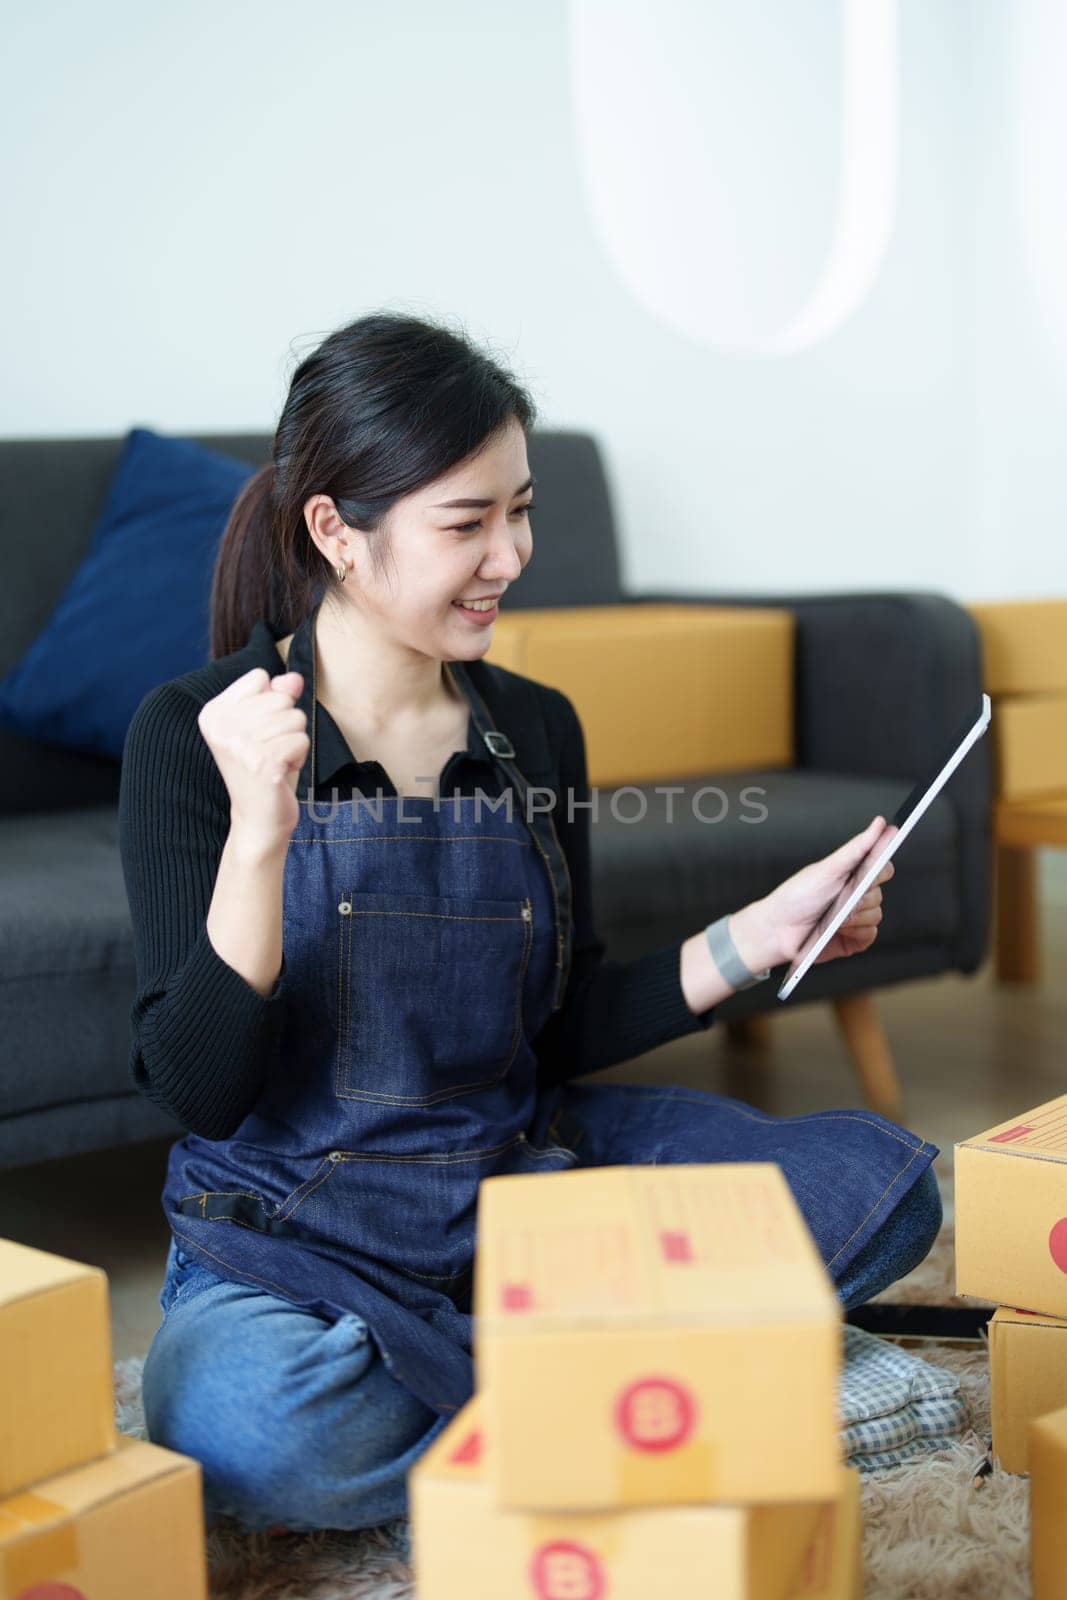 Startup small business entrepreneur of freelance Asian woman smiling and using tablet computer with Cheerful success of item online marketing packaging box and delivery SME idea concept.